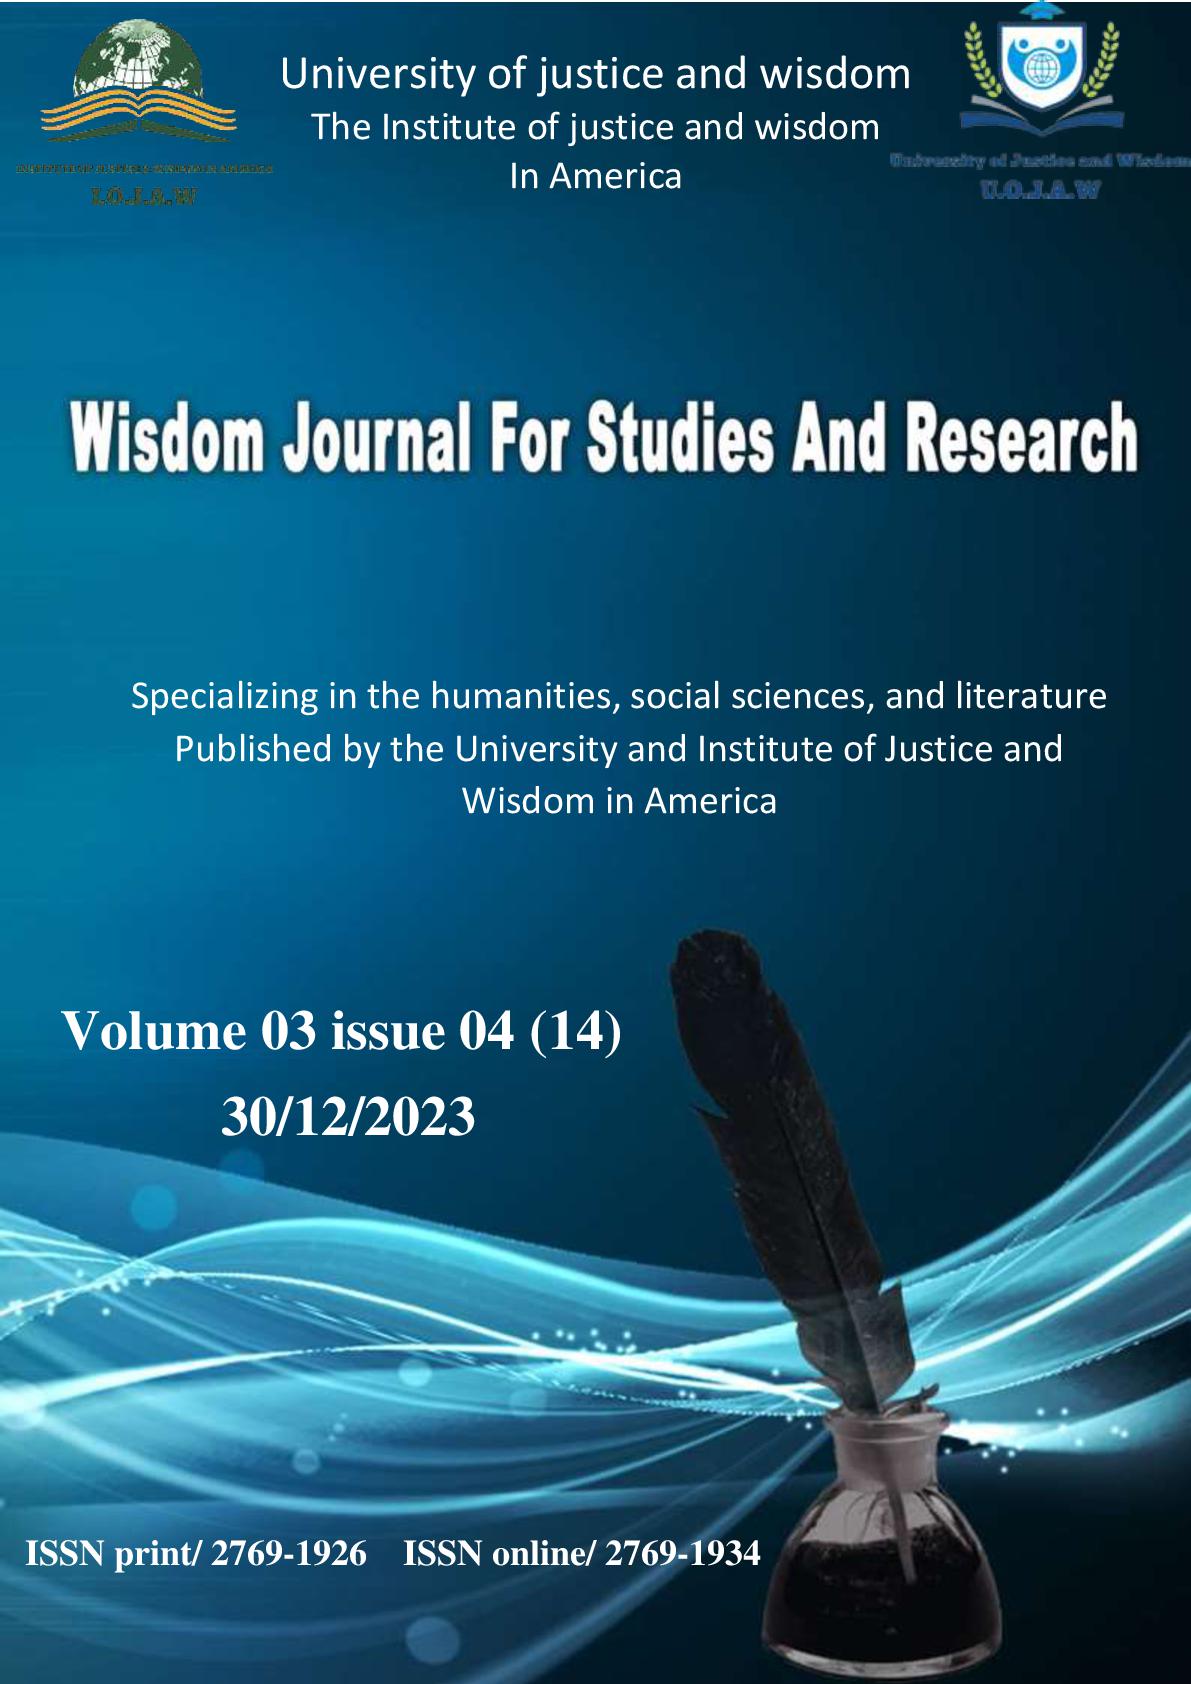 					View Vol. 3 No. 04 (2023): Wisdom Journal For Studies And Research volume 03 Issue 04(14)30/12/2023
				